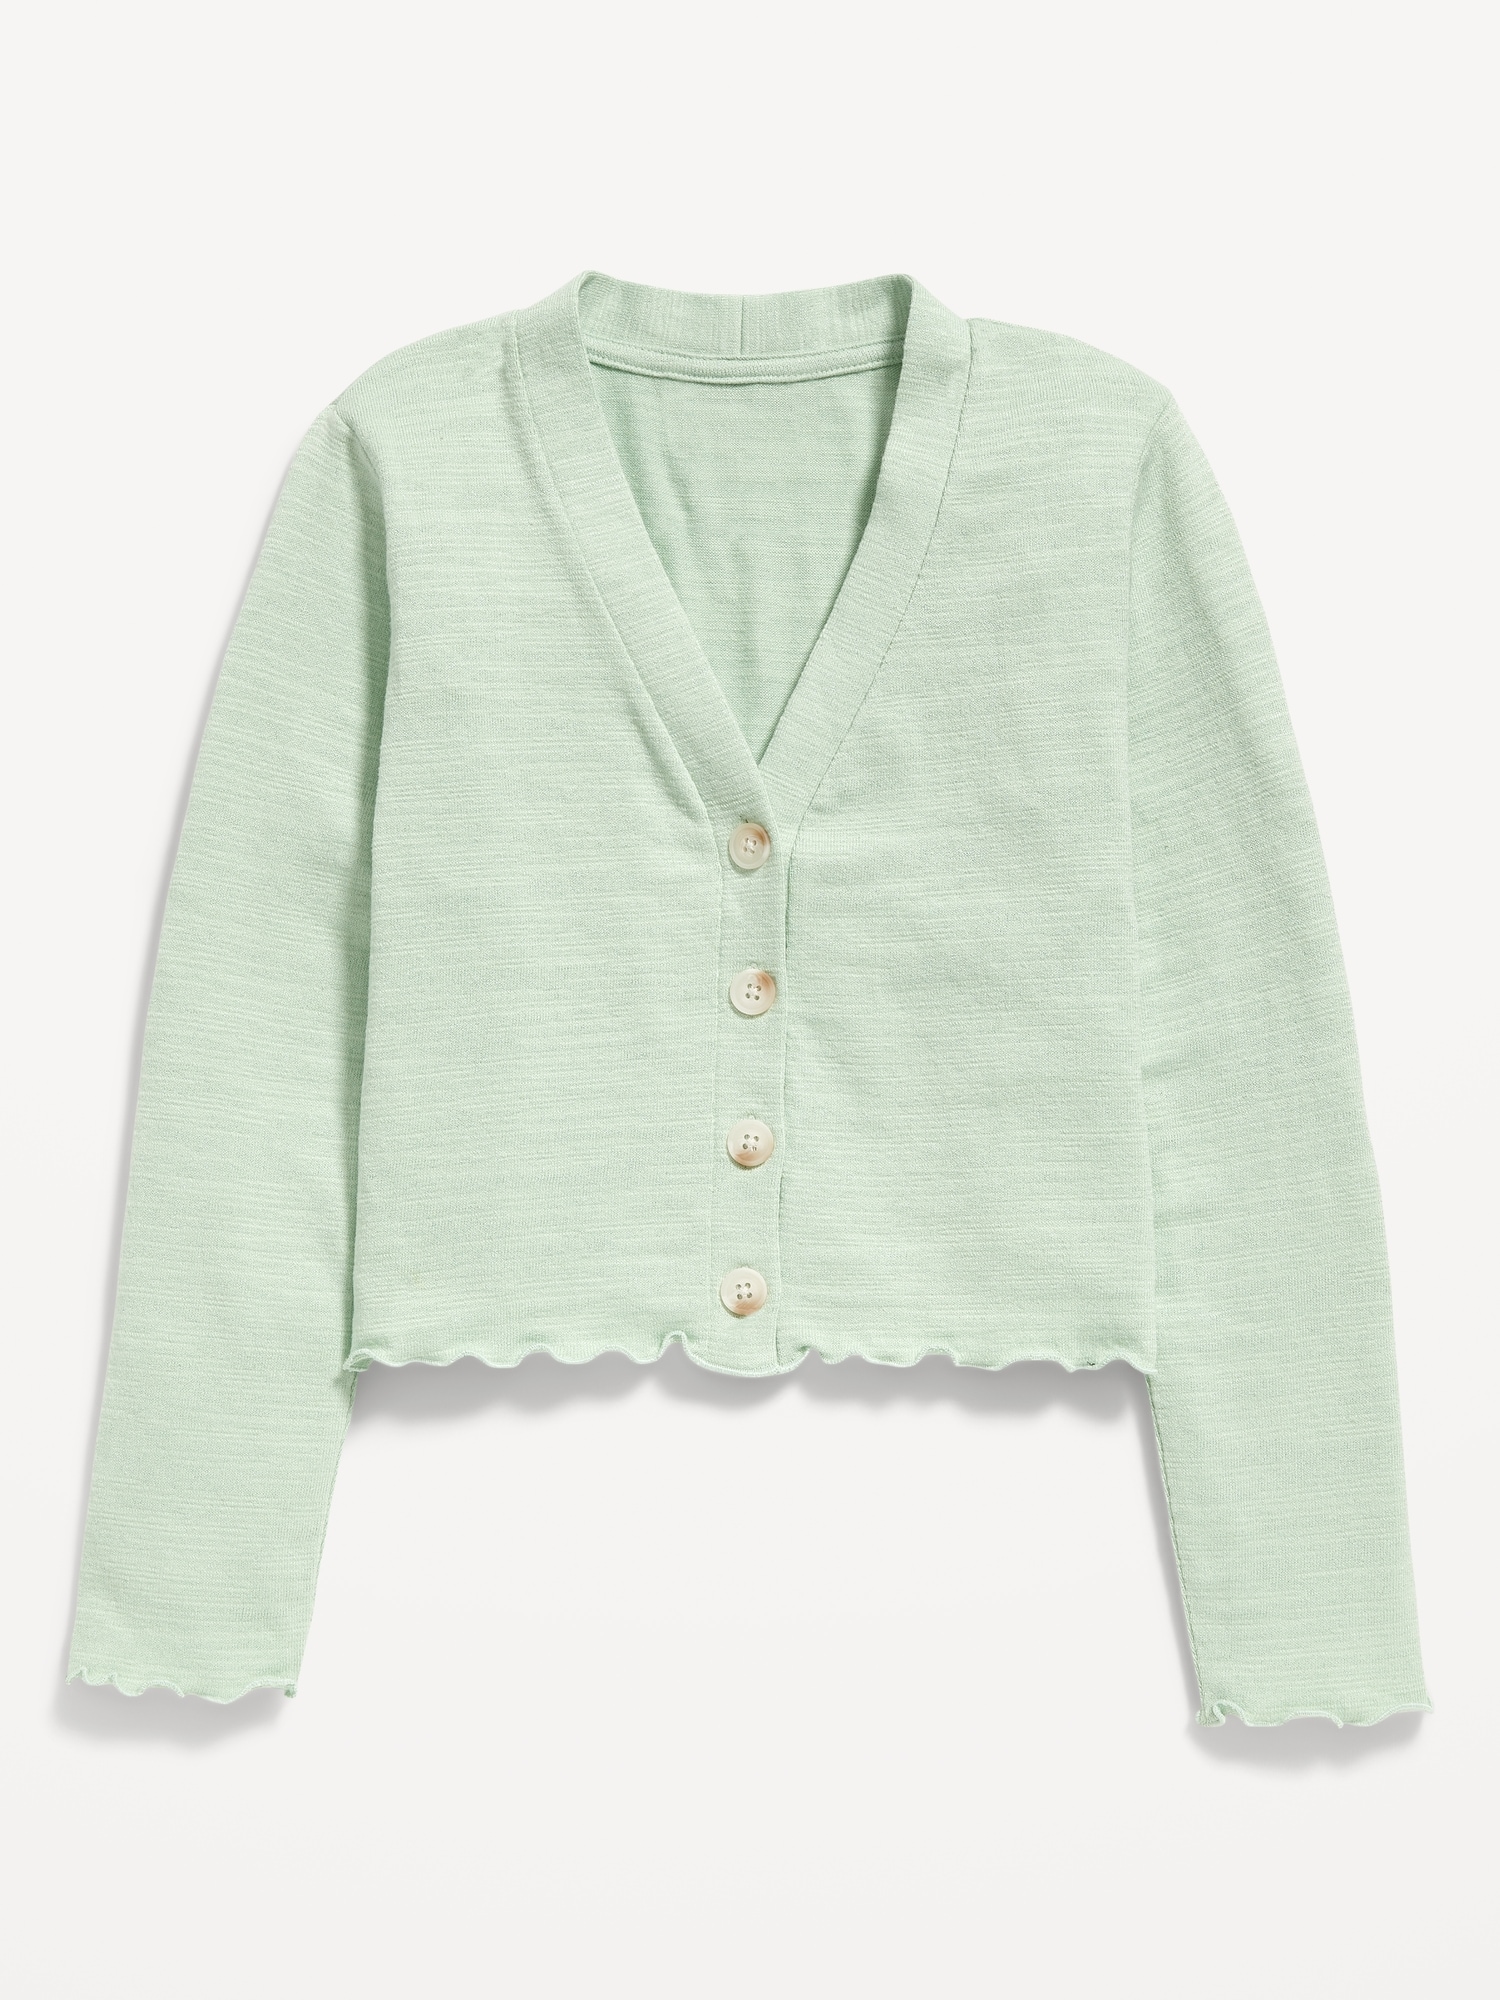 Old Navy Cropped Slub-Knit Button-Front Cardigan Sweater for Girls green. 1